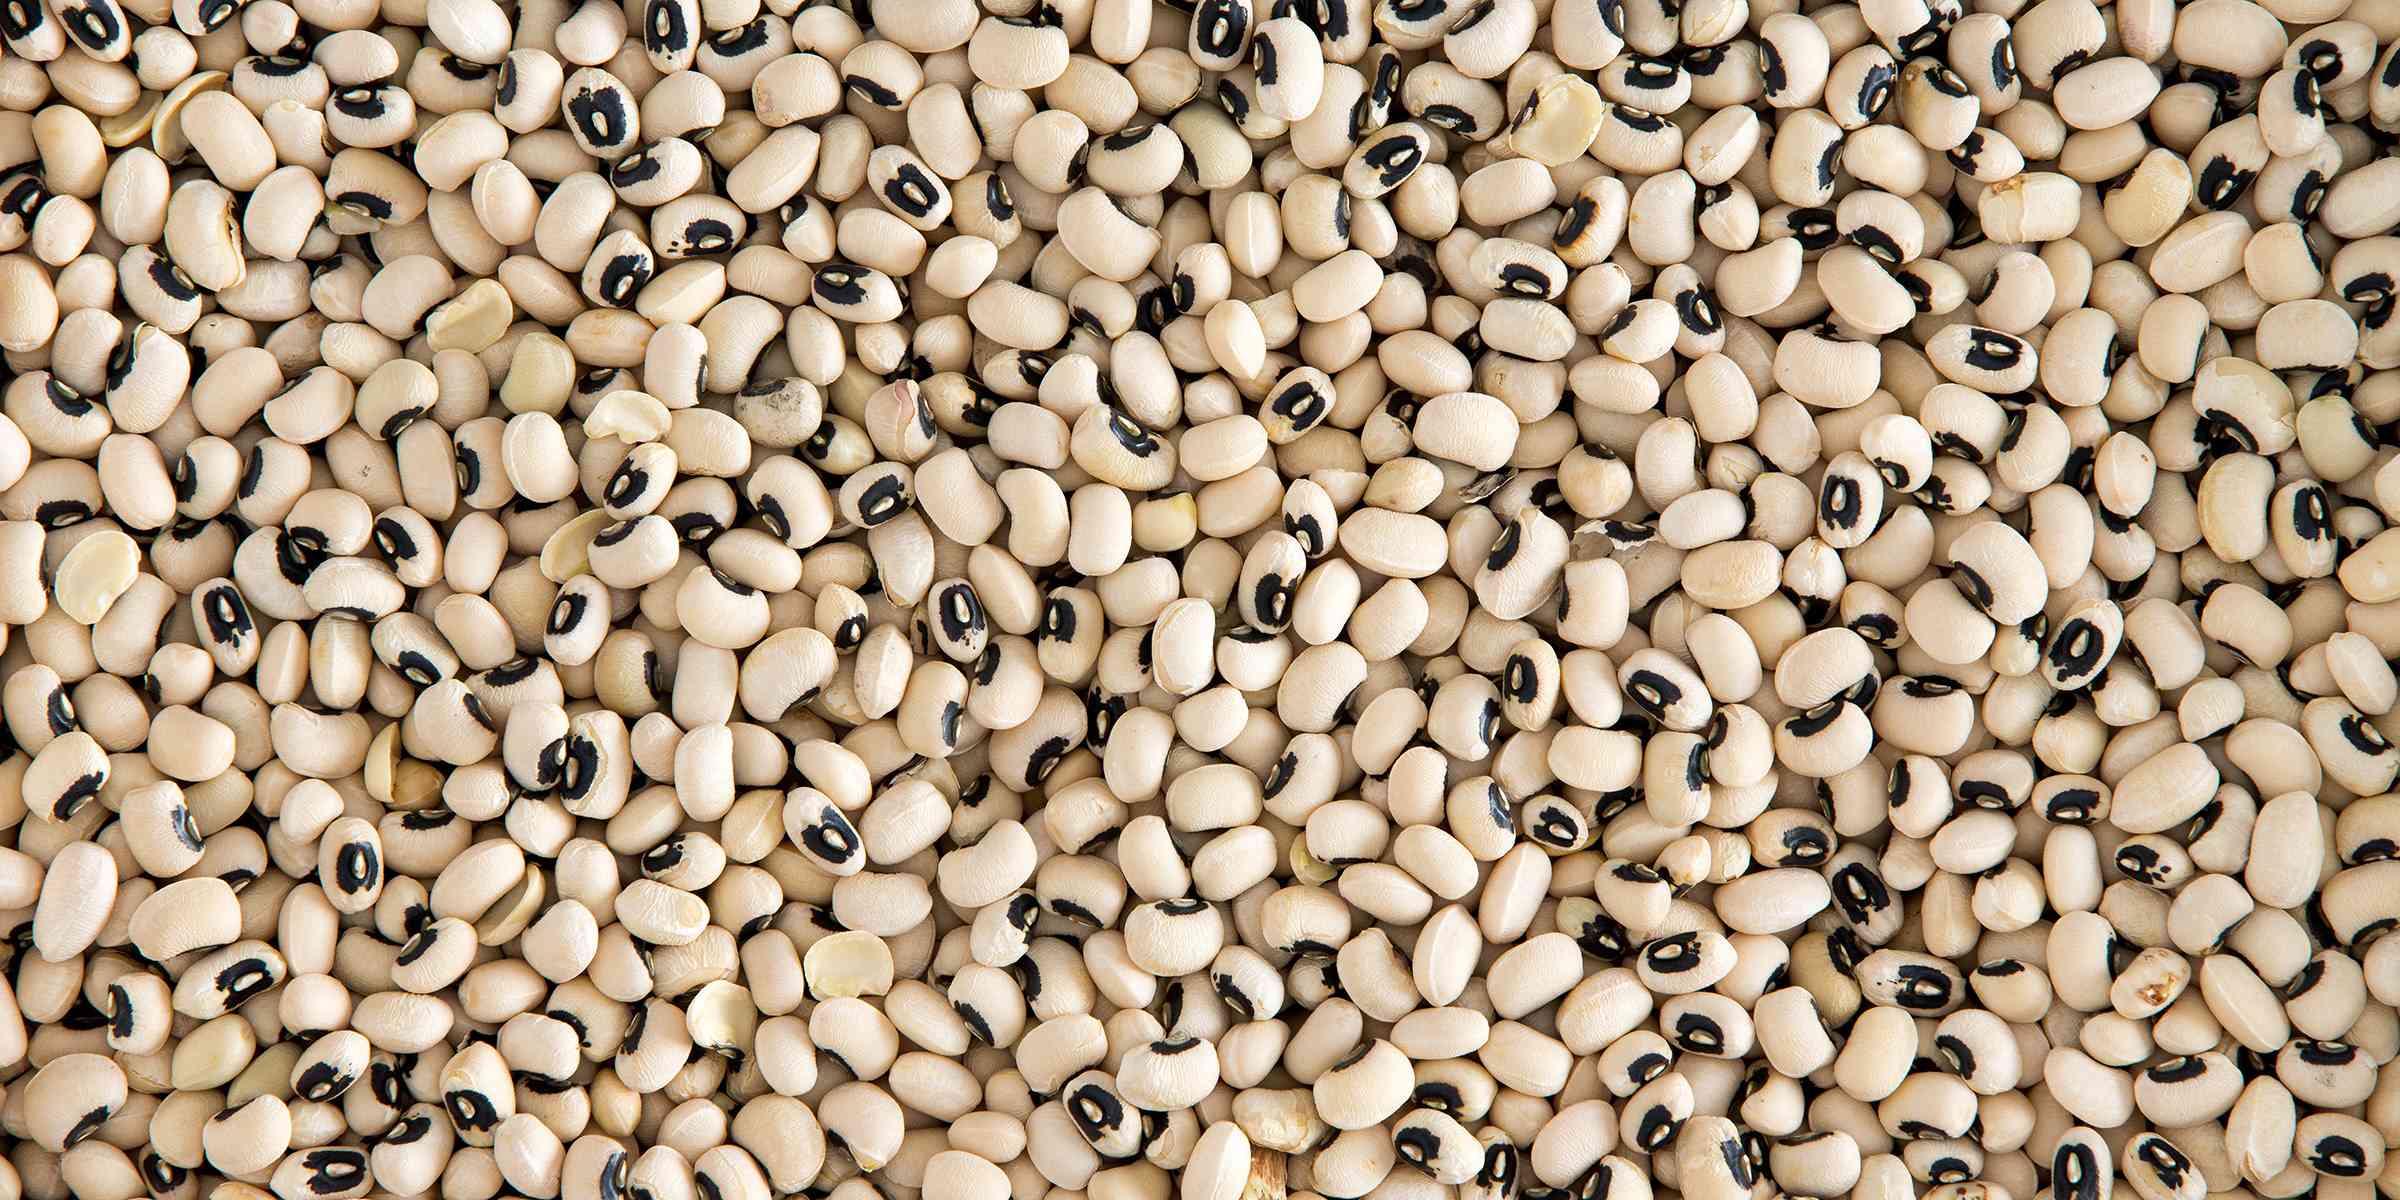 15-facts-about-black-eyed-beans